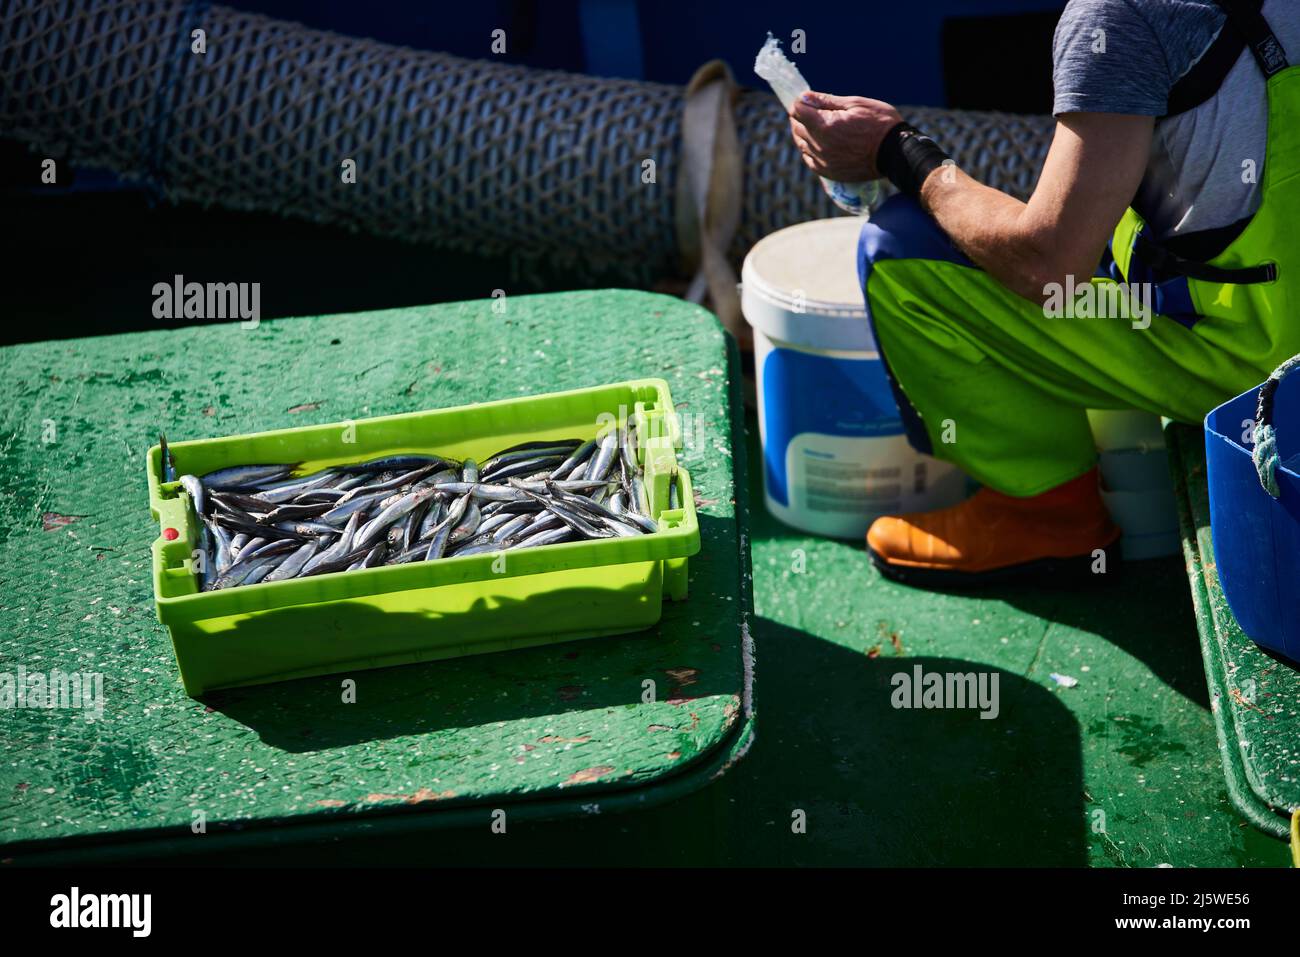 Freshly caught anchovies on the fishing boat, Bermeo, Biscay, Basque Country, Euskadi, Euskal Herria, Spain, Europe. Stock Photo